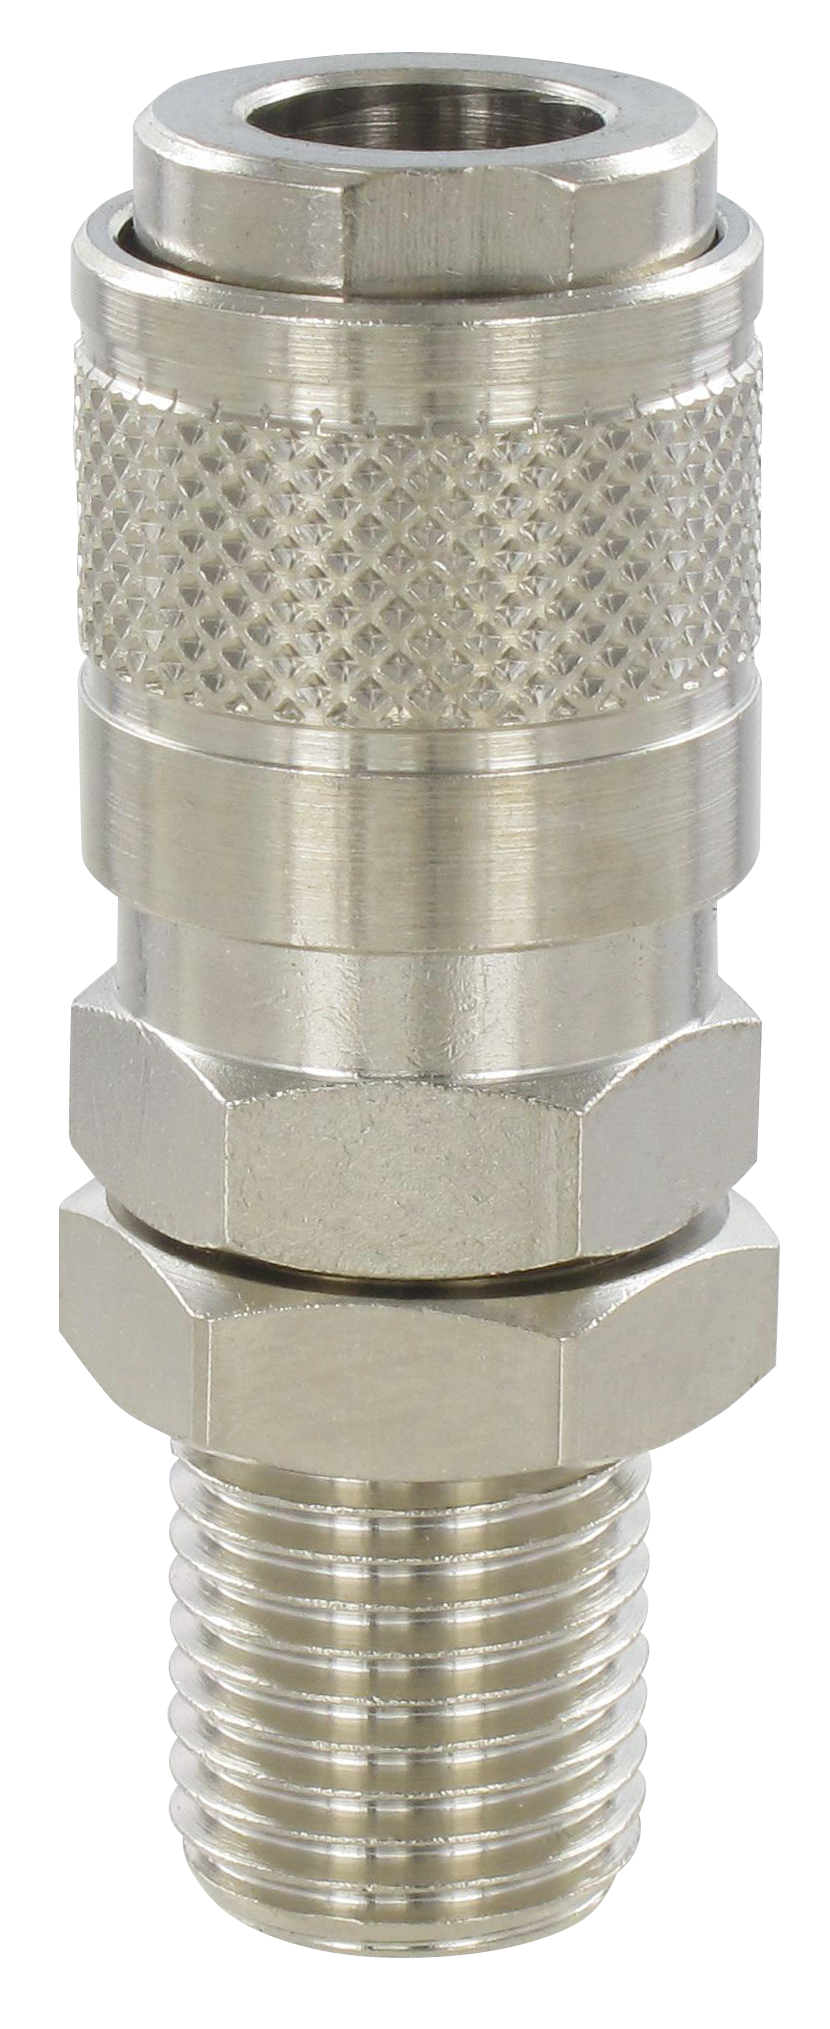 Quick-connect couplings, US-MIL standard ISO 6150 B-12 SOCKET WITH HOSE CONNECTION Fittings and quick-connect couplings